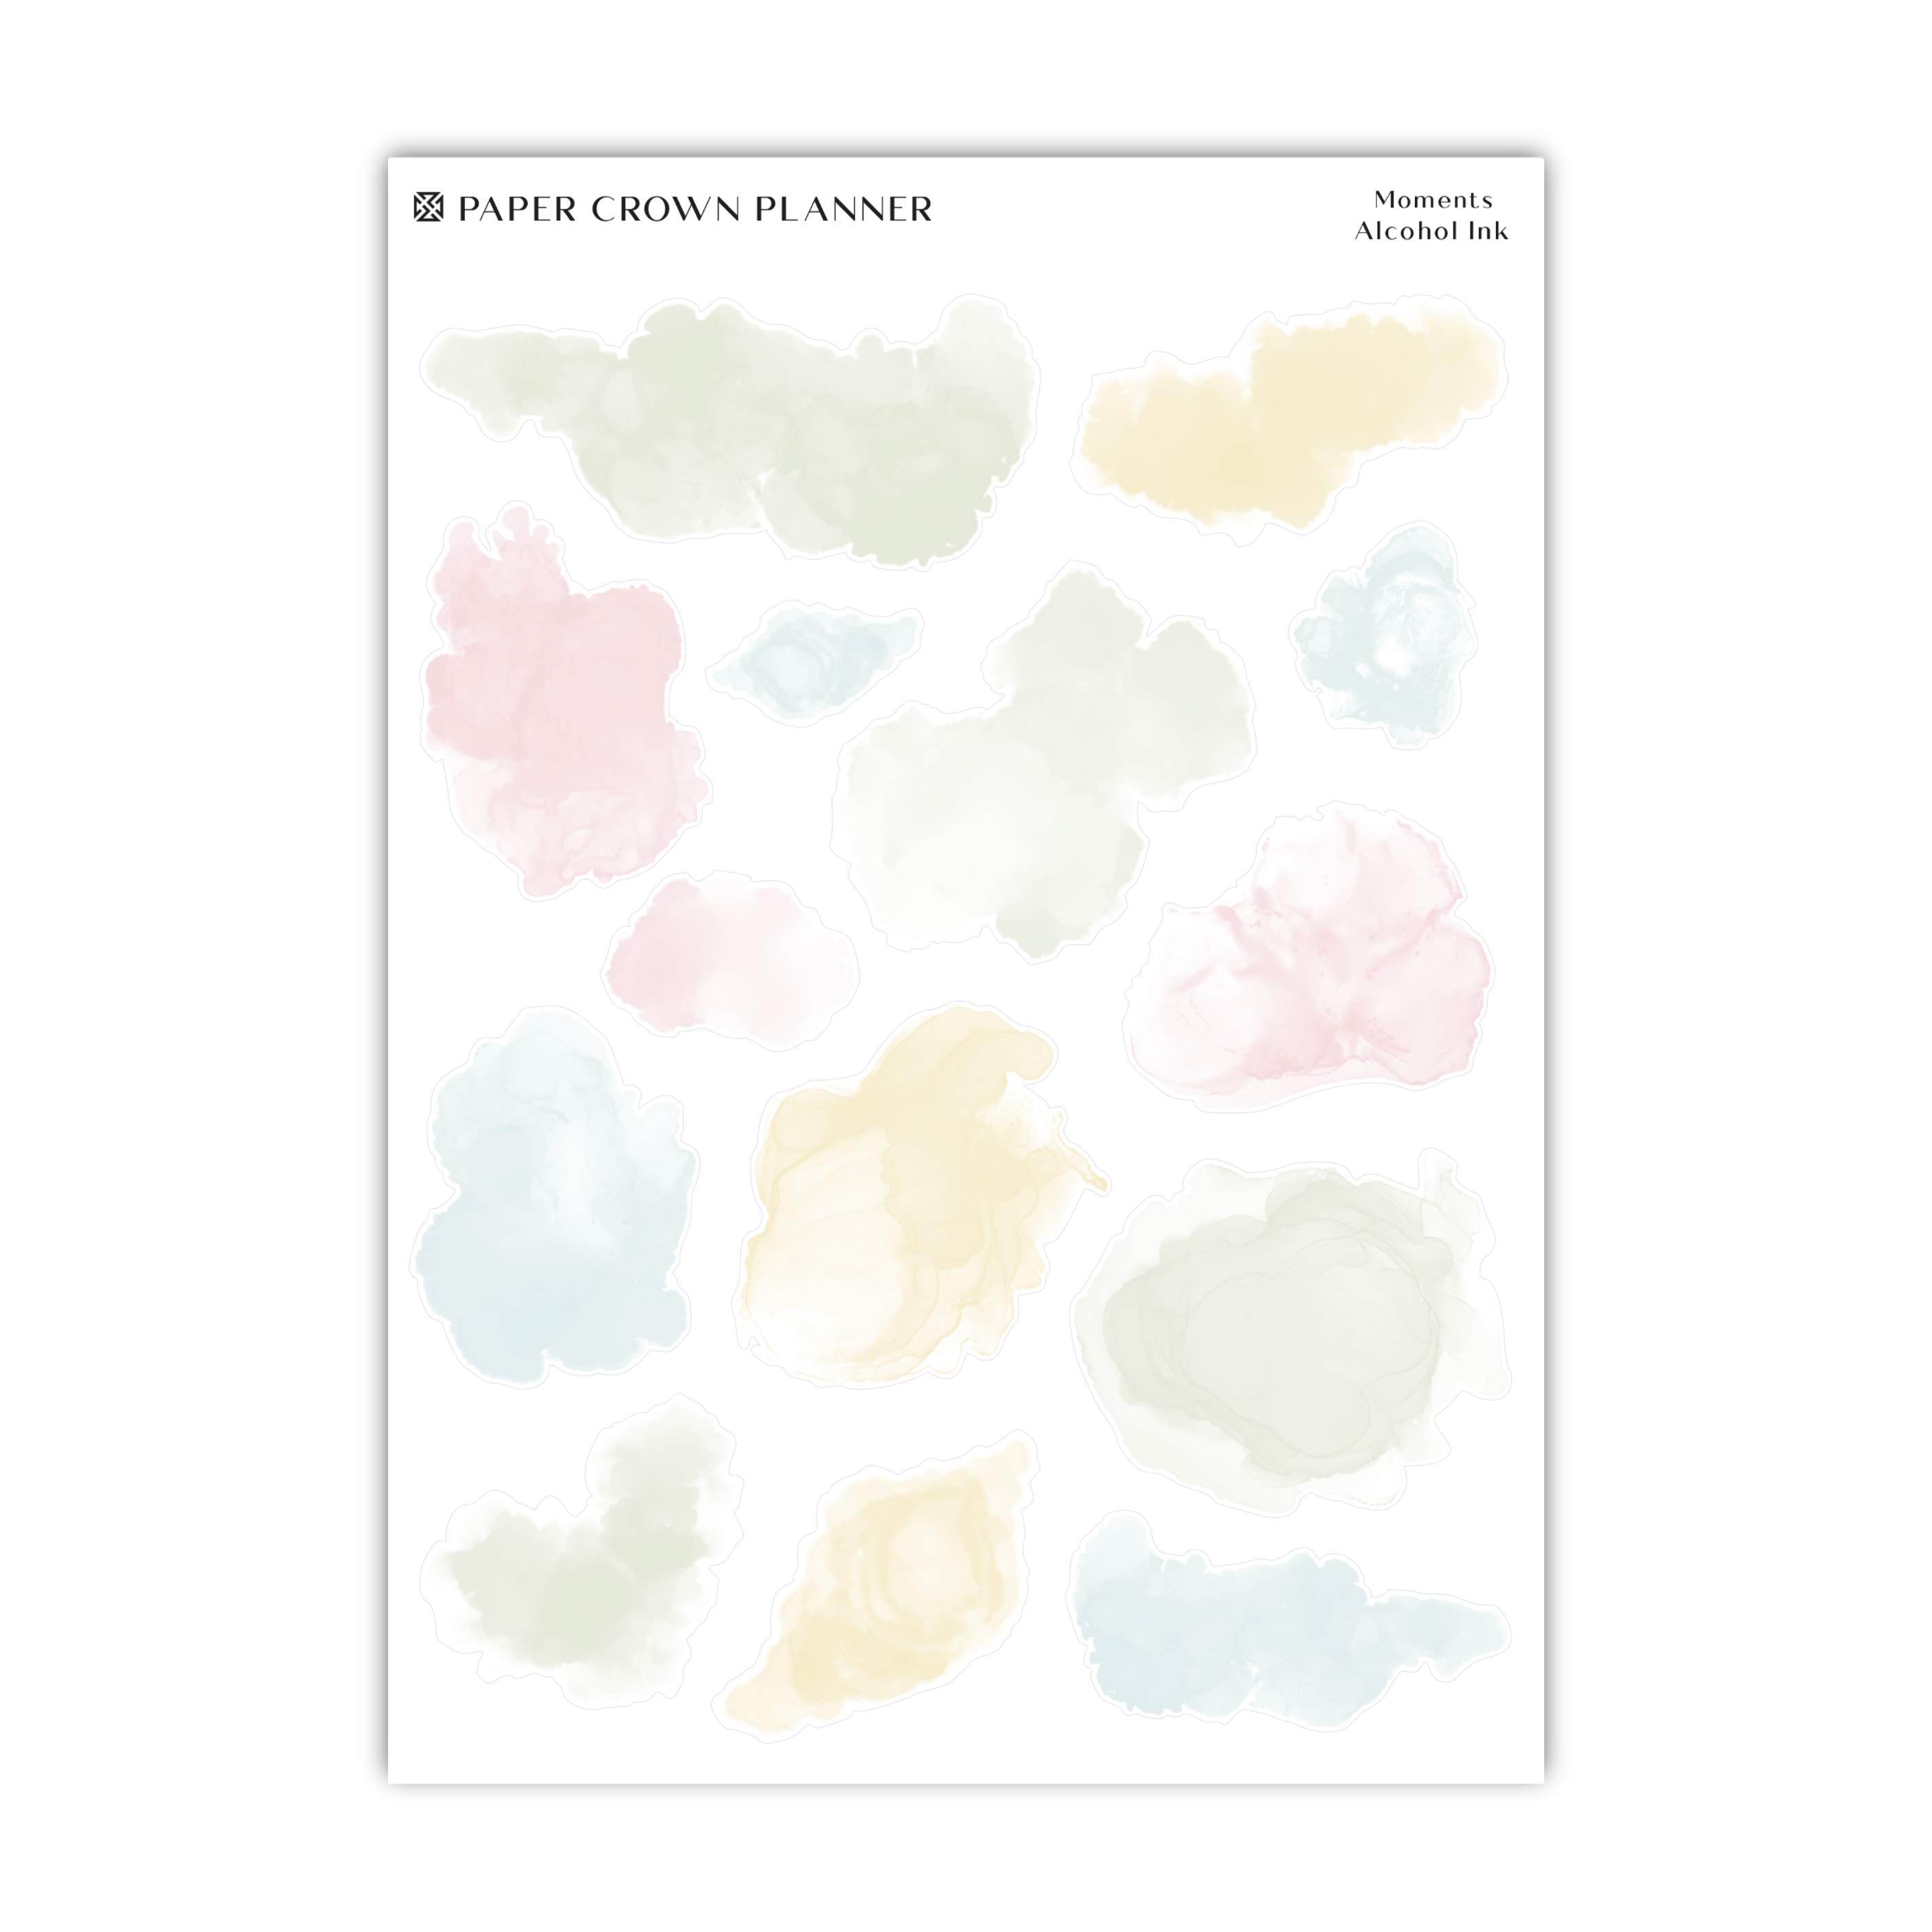 a paper crown planner with pastel colors